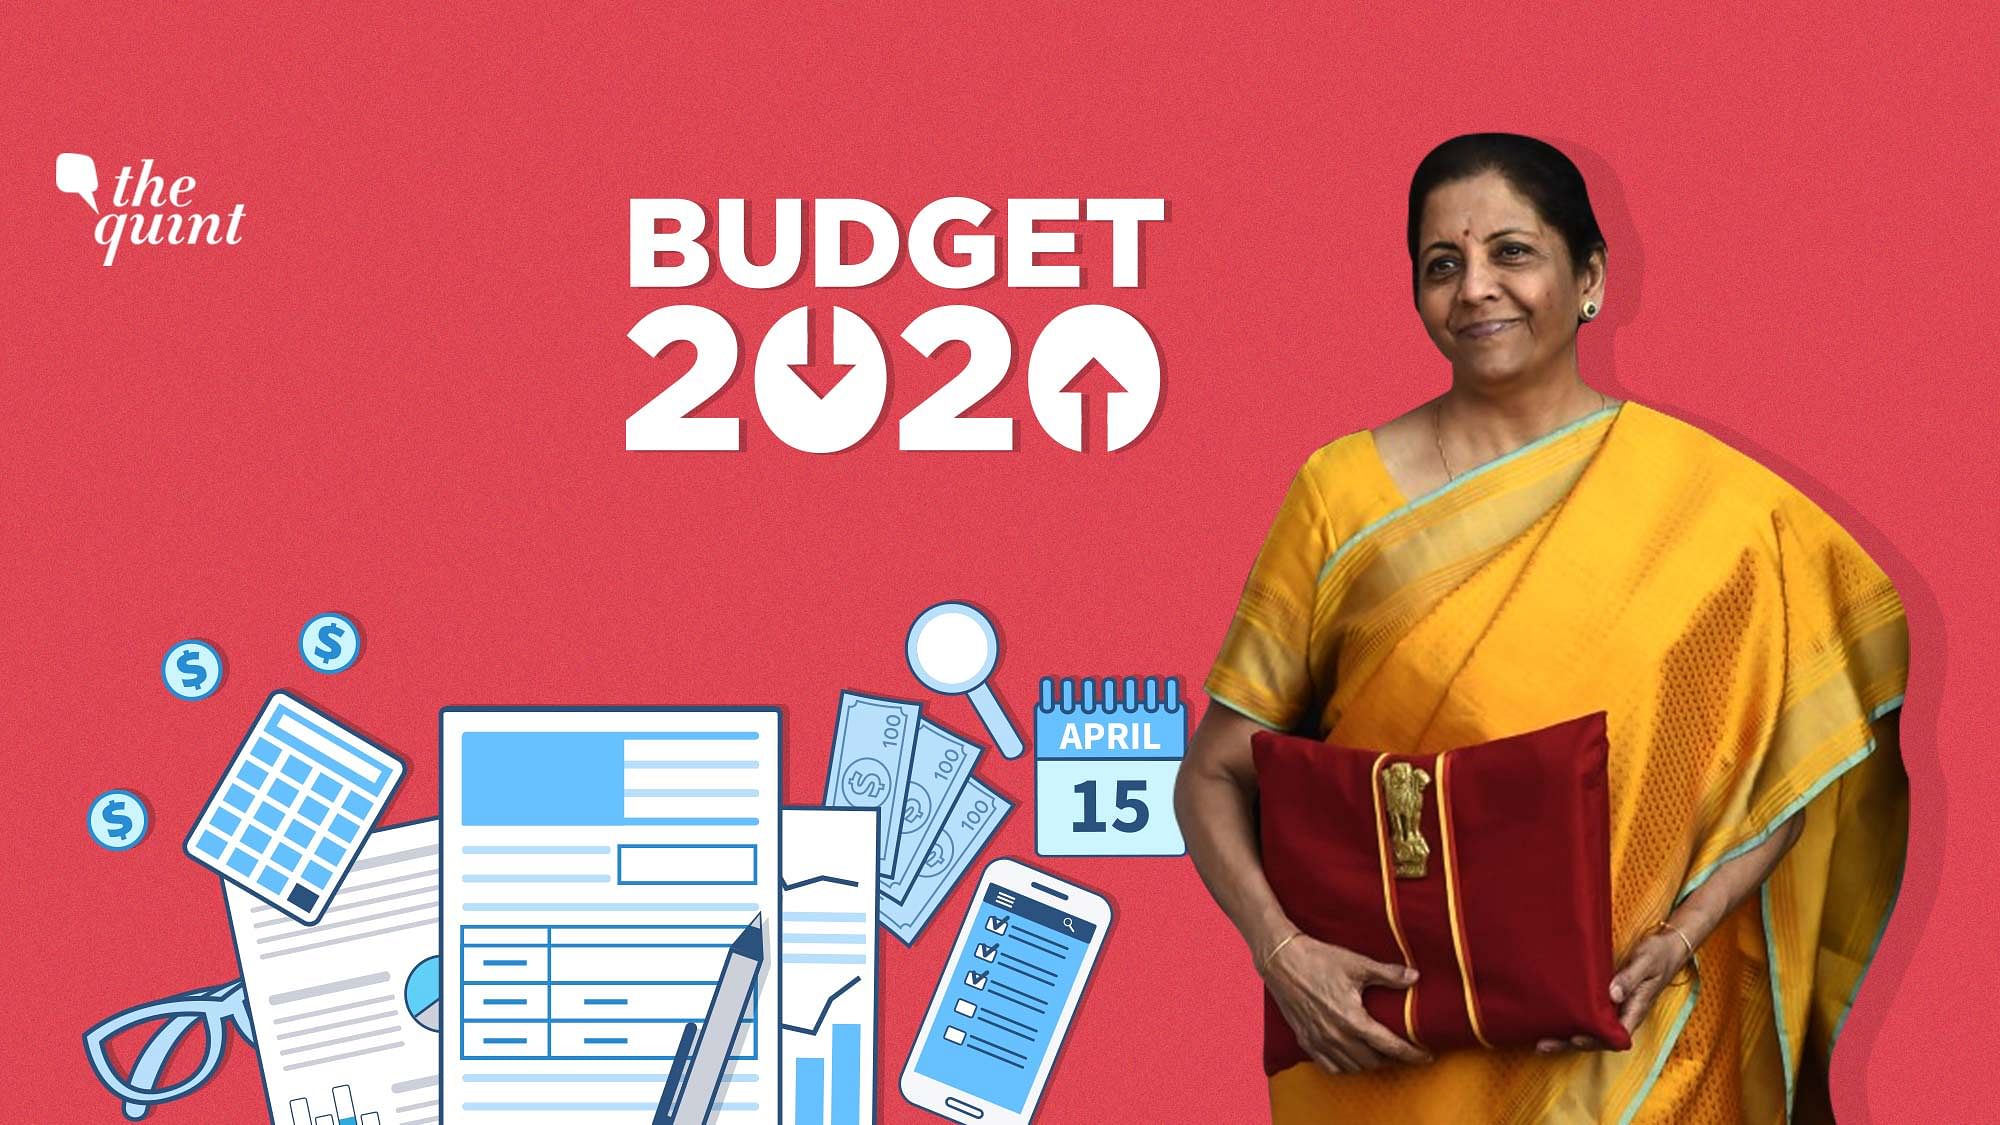 Various prominent members of the finance and business world reacted to the Union Budget 2020 after it was presented by Finance Minister Nirmala Sitharaman in Parliament.